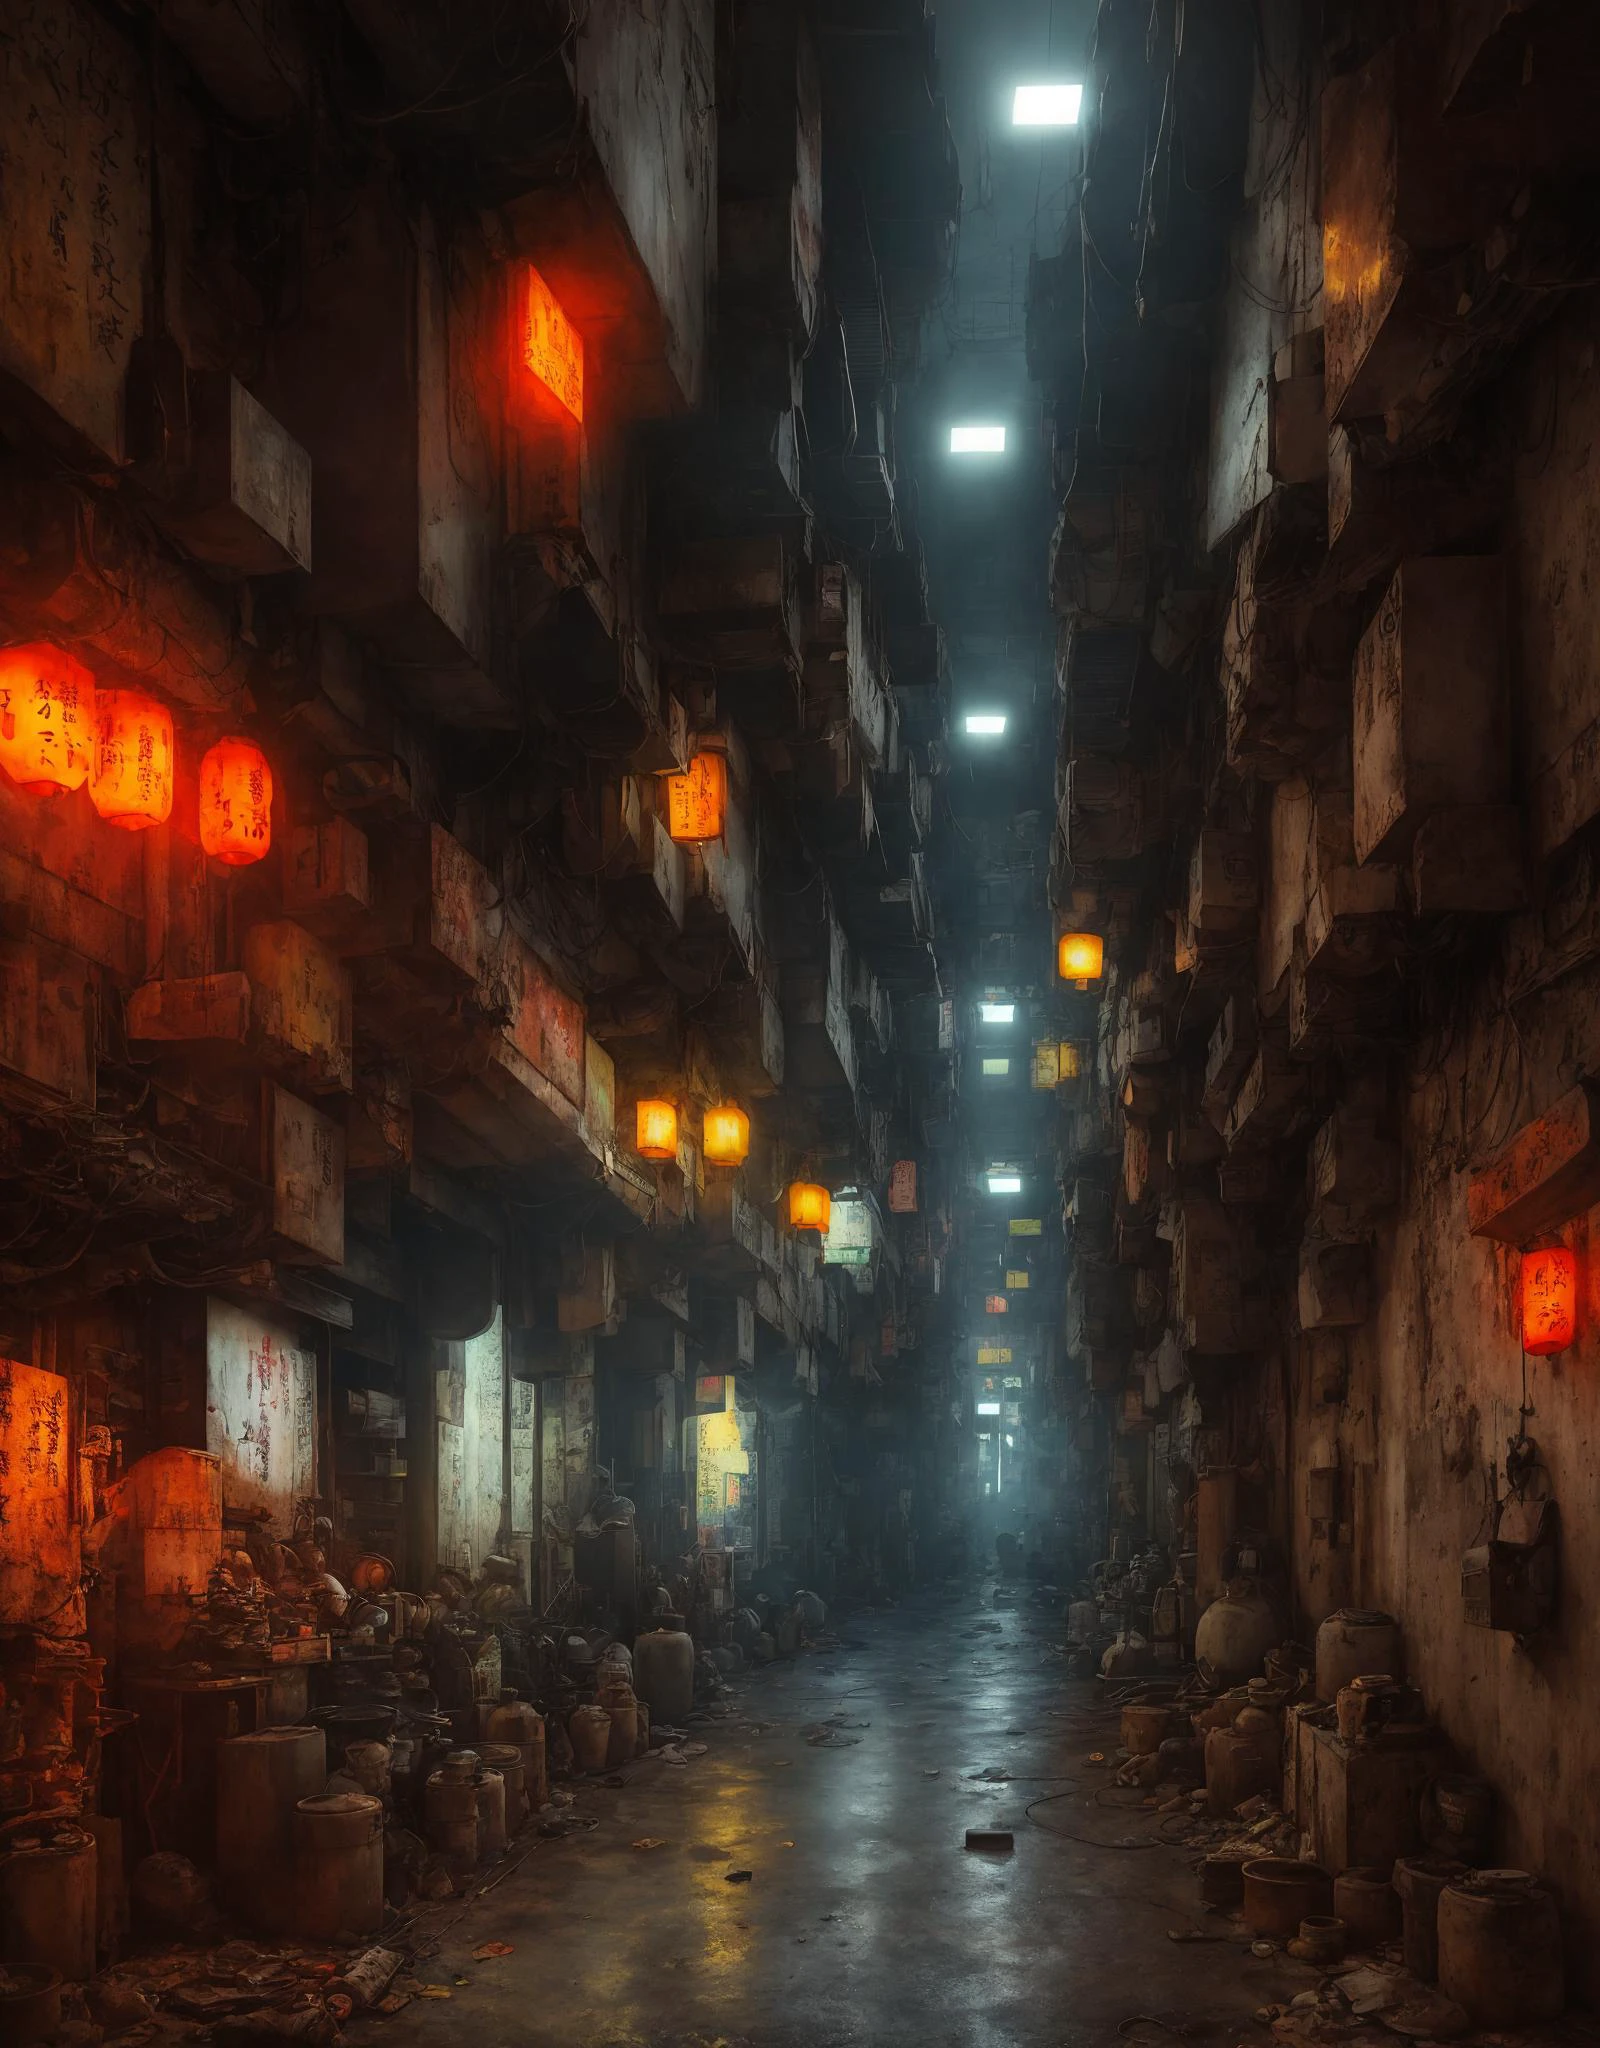 Kowloon Walled City, overcrowded city levels, balconies, air conditioners, gloomy mood, lots of colors, hyper realistic, mysterious lighting, oversaturated, pipes, wires, utility mechanisms